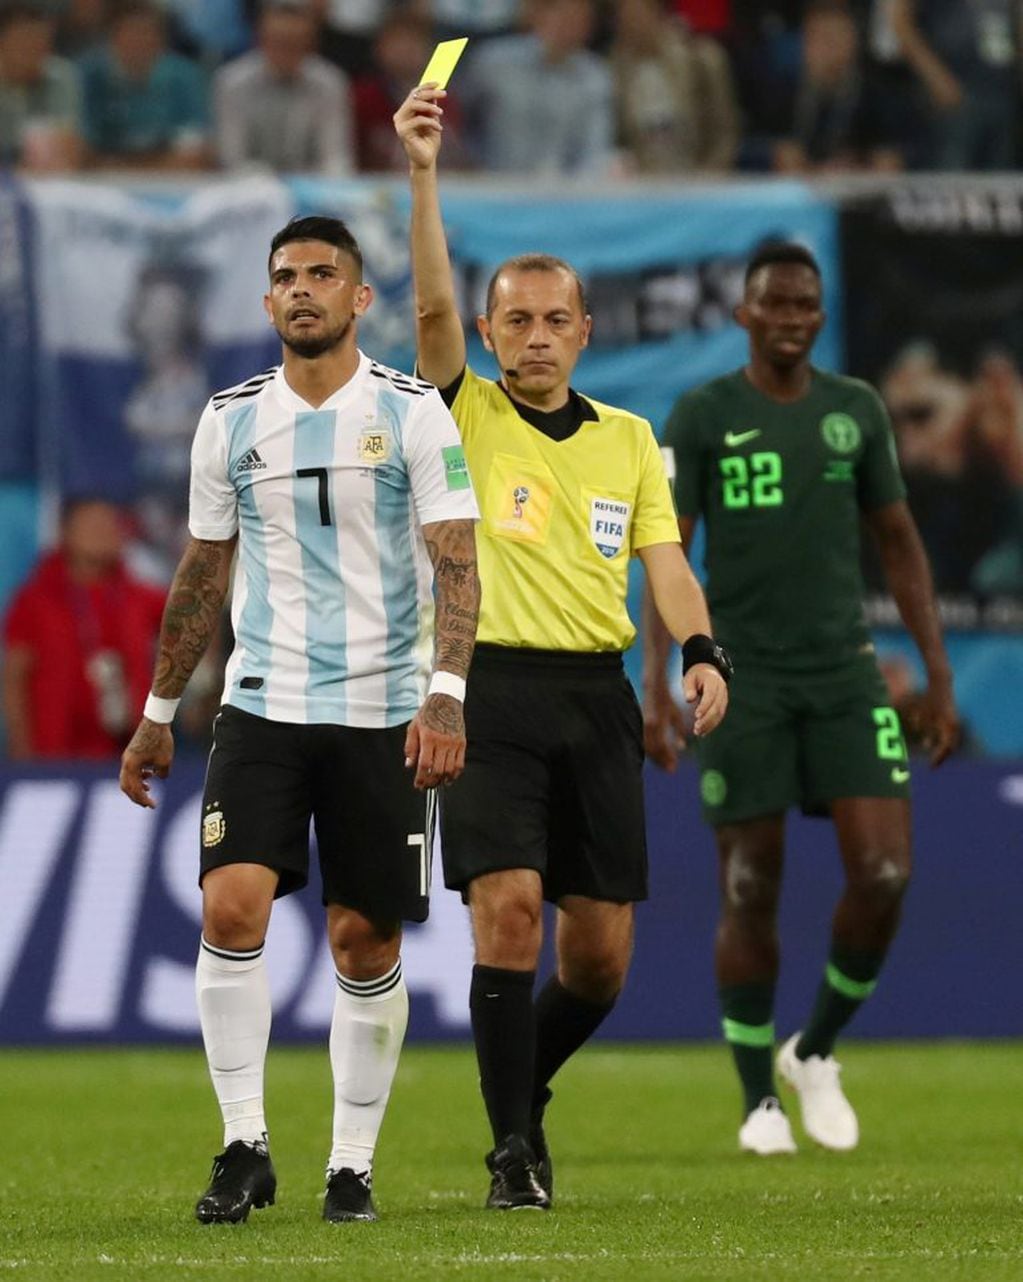 Soccer Football - World Cup - Group D - Nigeria vs Argentina - Saint Petersburg Stadium, Saint Petersburg, Russia - June 26, 2018   Argentina's Ever Banega is shown a yellow card by referee Cuneyt Cakir         REUTERS/Sergio Perez